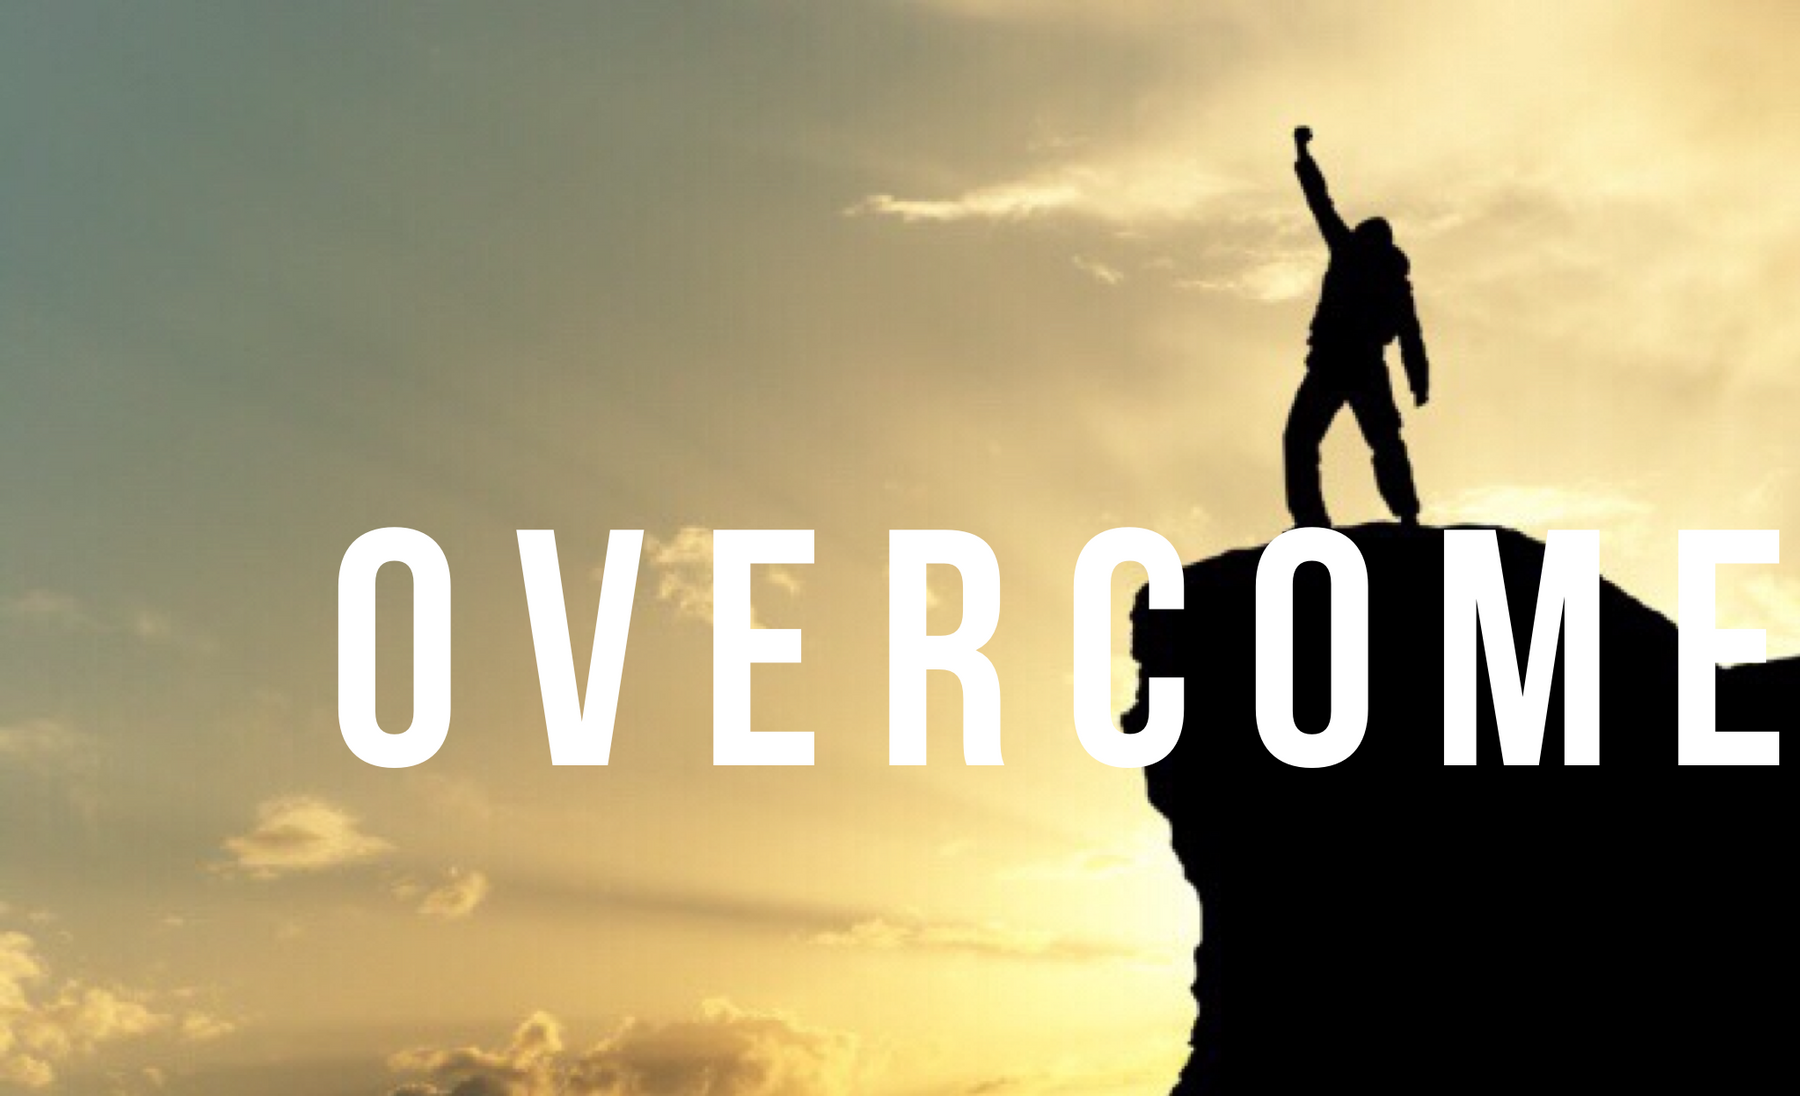 The One Who Overcomes Is On Your Side